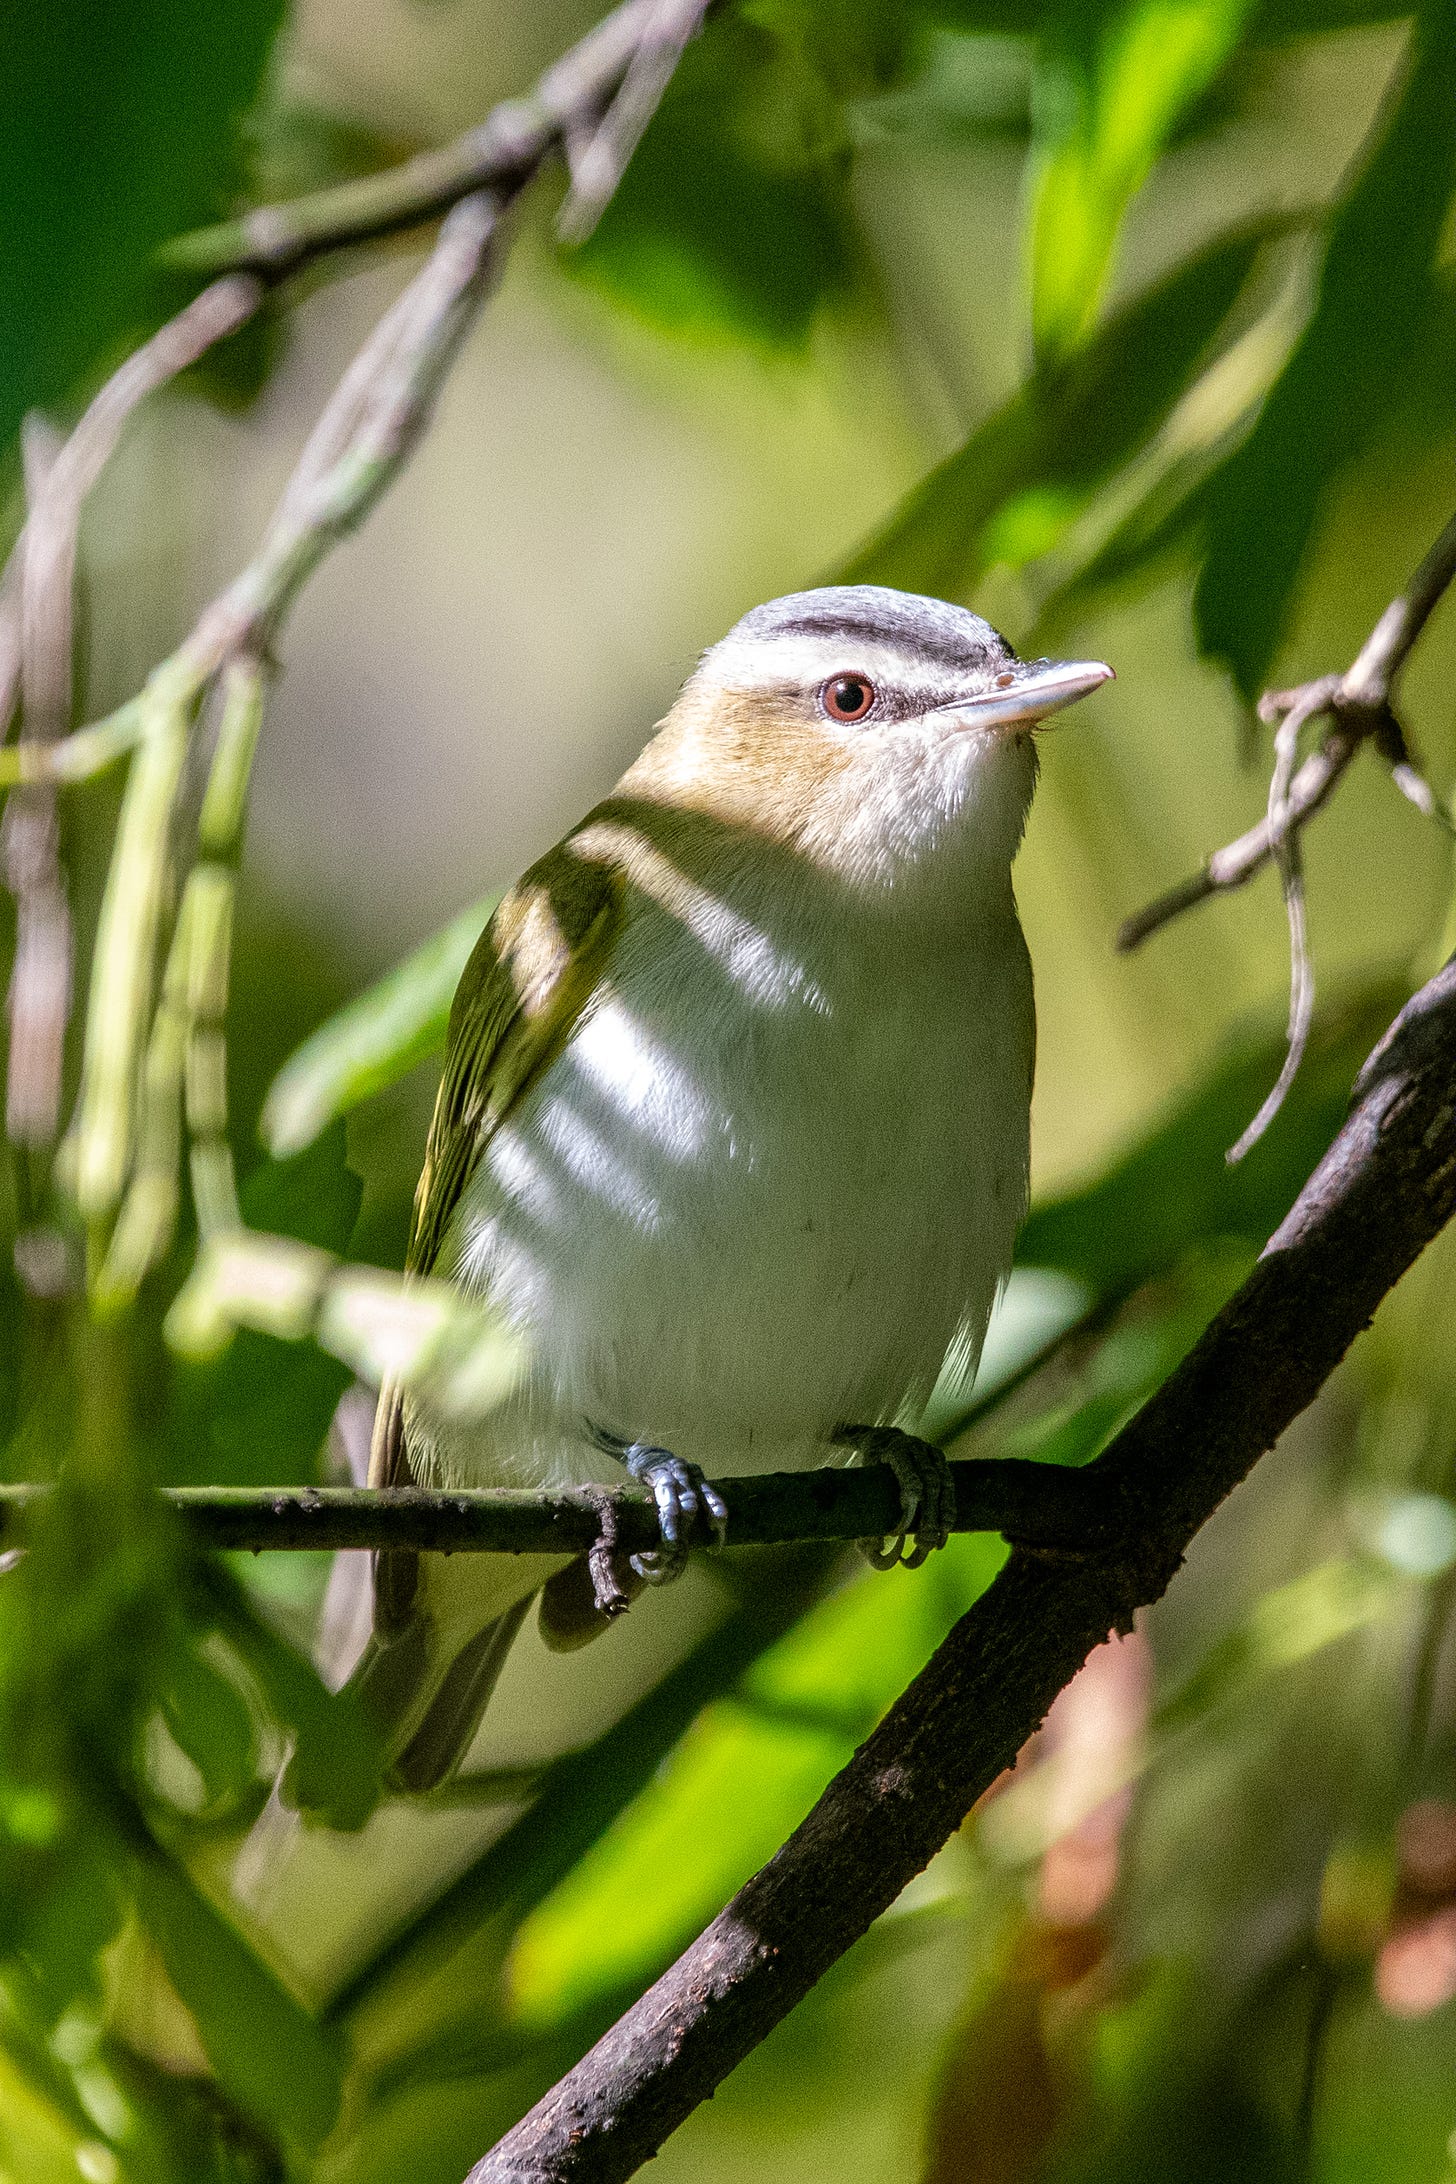 Standing as if at attention on its perch is a small bird with a greenish wing, a white breast, a gray cap, a dark eyeline, and a vividly orange-red eye